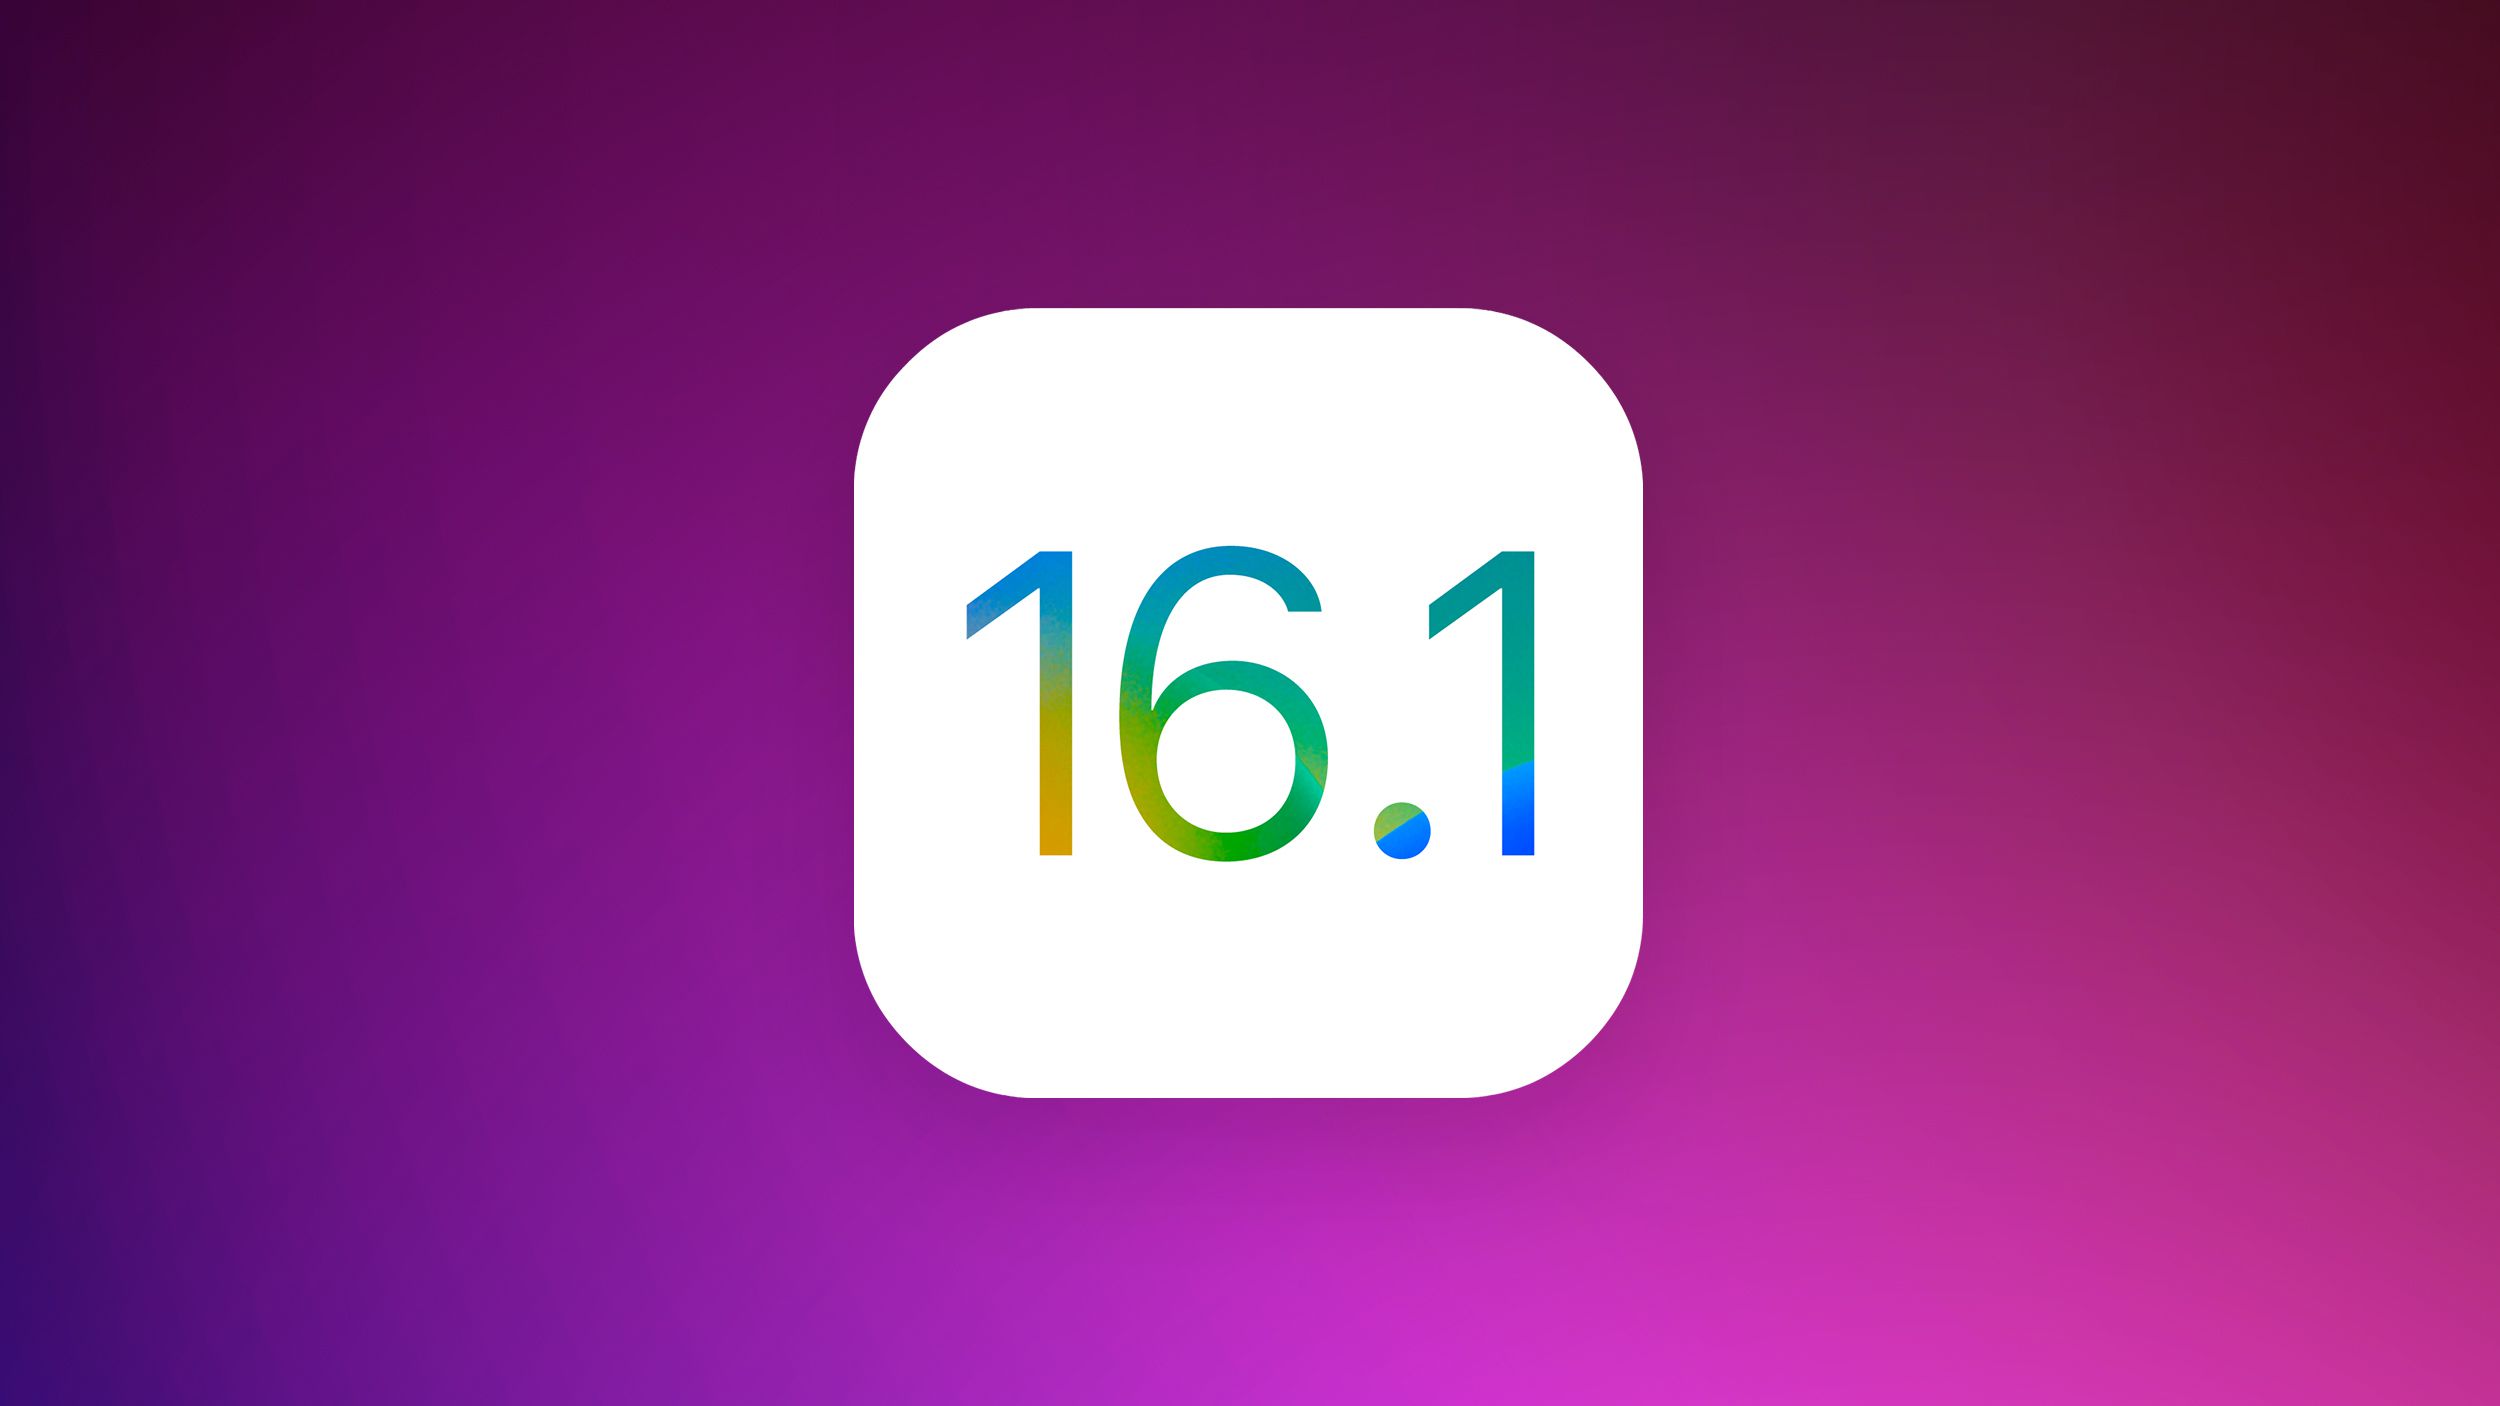 Apple Seeds New Public Betas of iOS 16.1 and iPadOS 16.1 With Stage Manager for Older iPad Pro Models